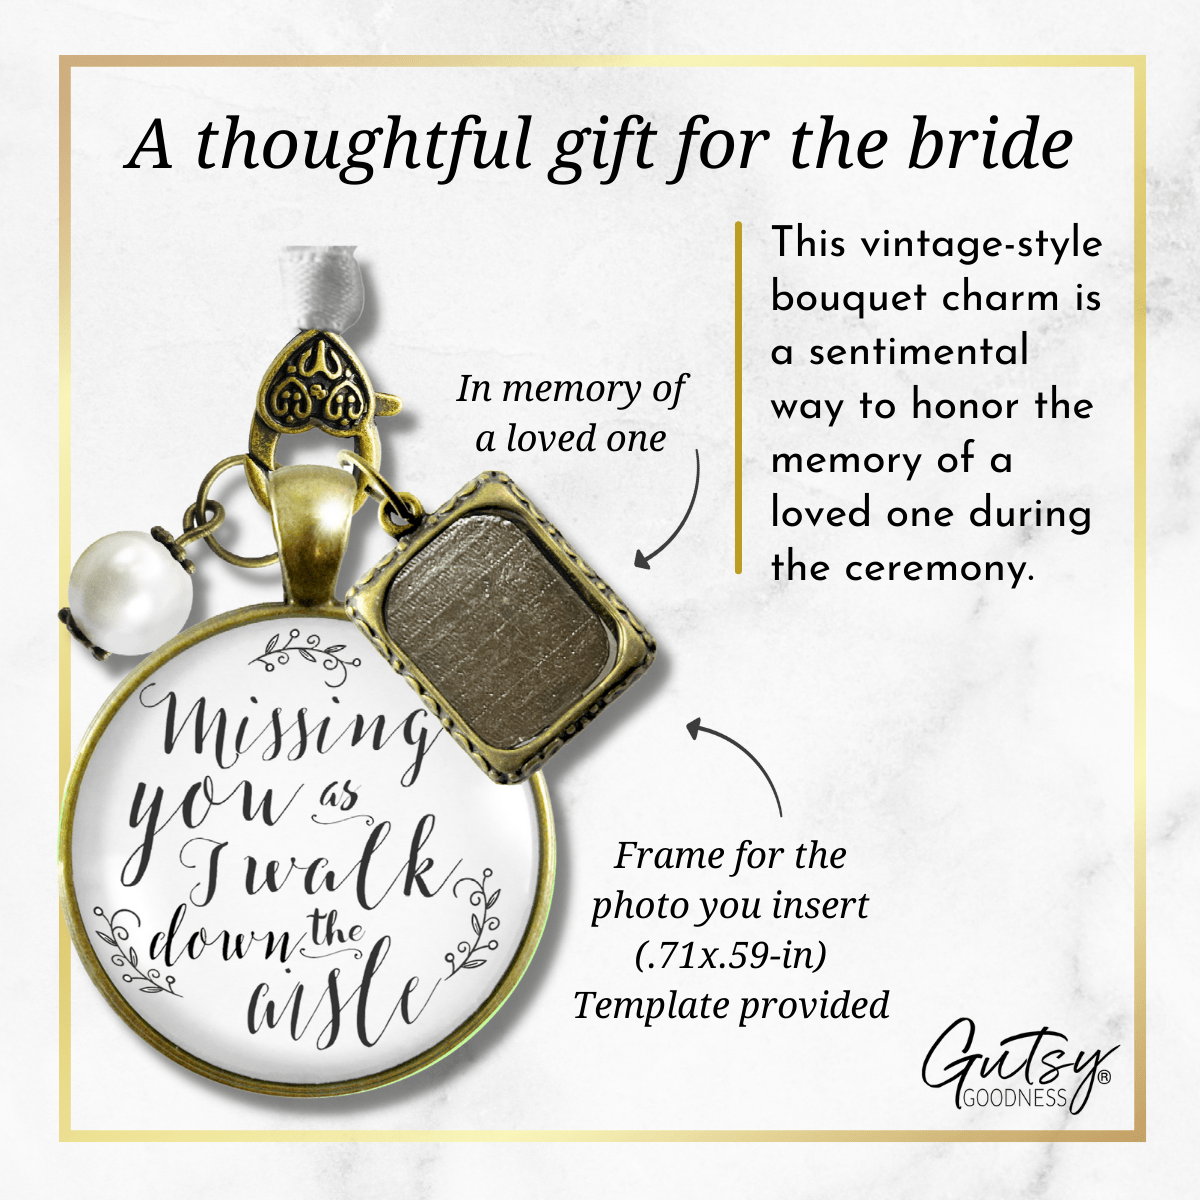 Missing You As I Walk Down The Aisle - Bronze - White - White Bead - Gutsy Goodness Handmade Jewelry Gifts